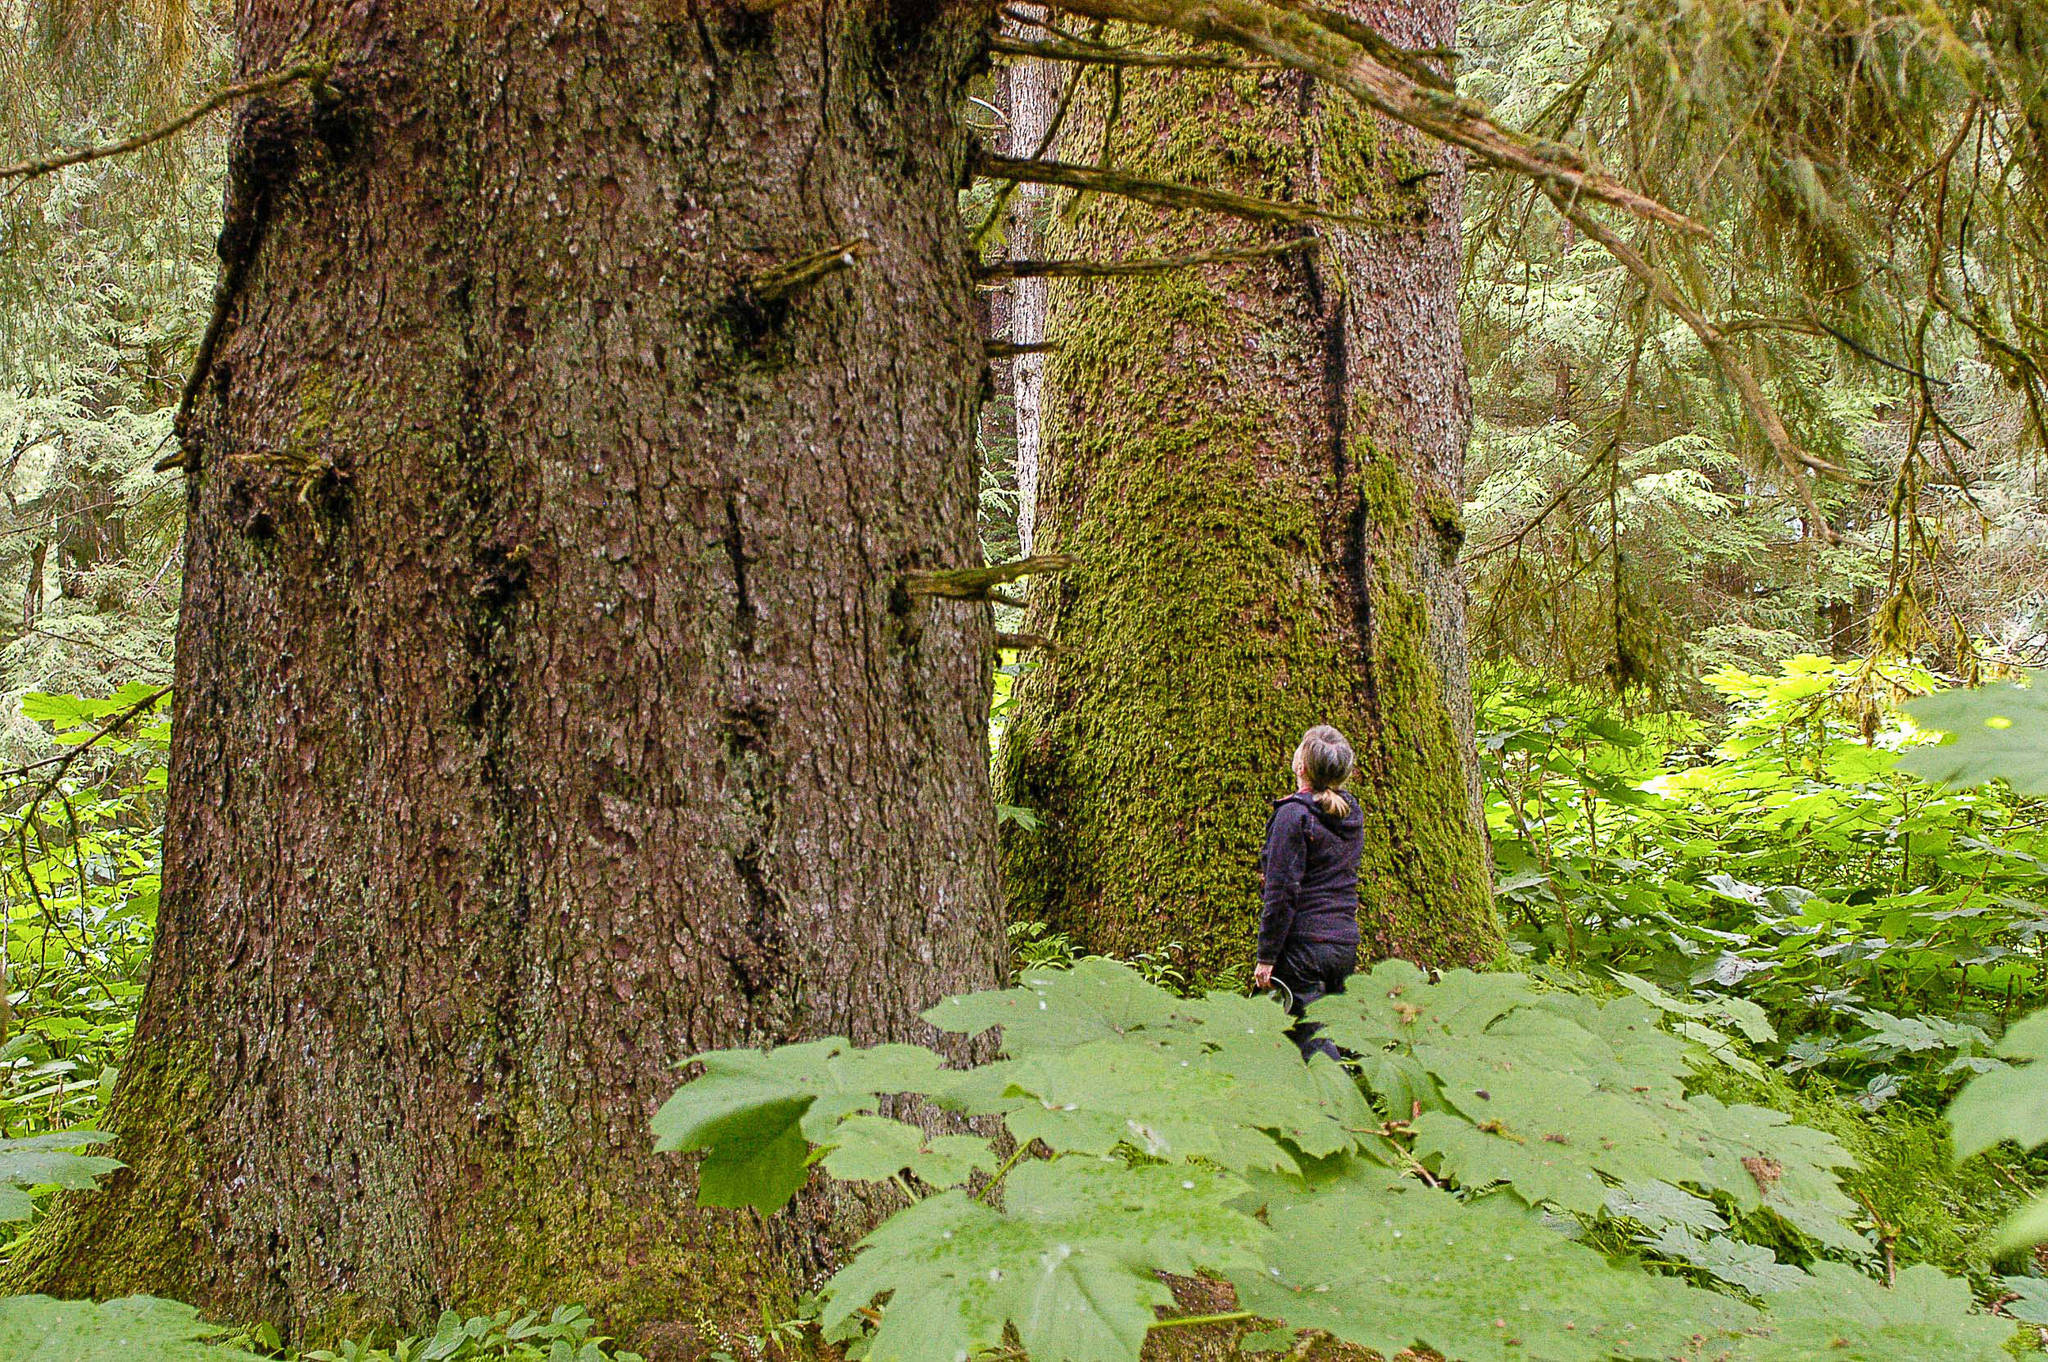 Mary Beth Schoen admiring a large-tree old-growth stand in Saook Bay on northeastern Baranof Island. Some individual trees were over six feet in diameter and many centuries old. This riparian area was adjacent to a salmon stream and was full of bear trails. Large-tree old growth stands are rare on the Tongass. (Photo courtesy John Schoen)